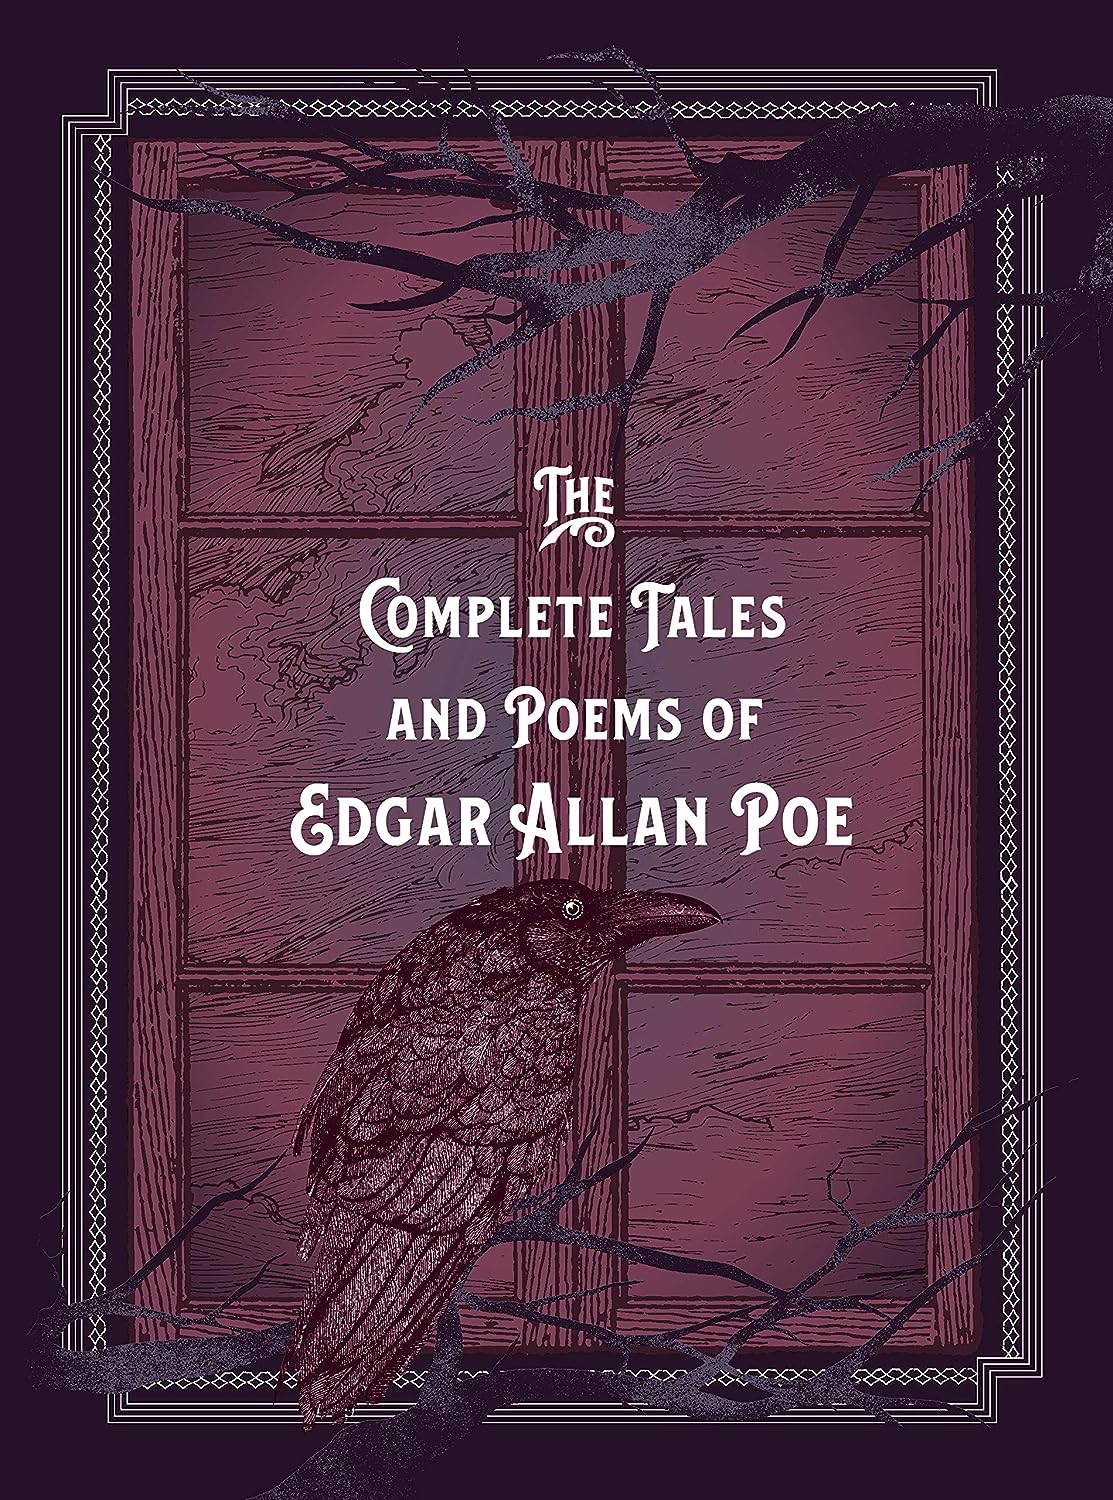 The Complete Tales Poems of Edgar Allan Poe